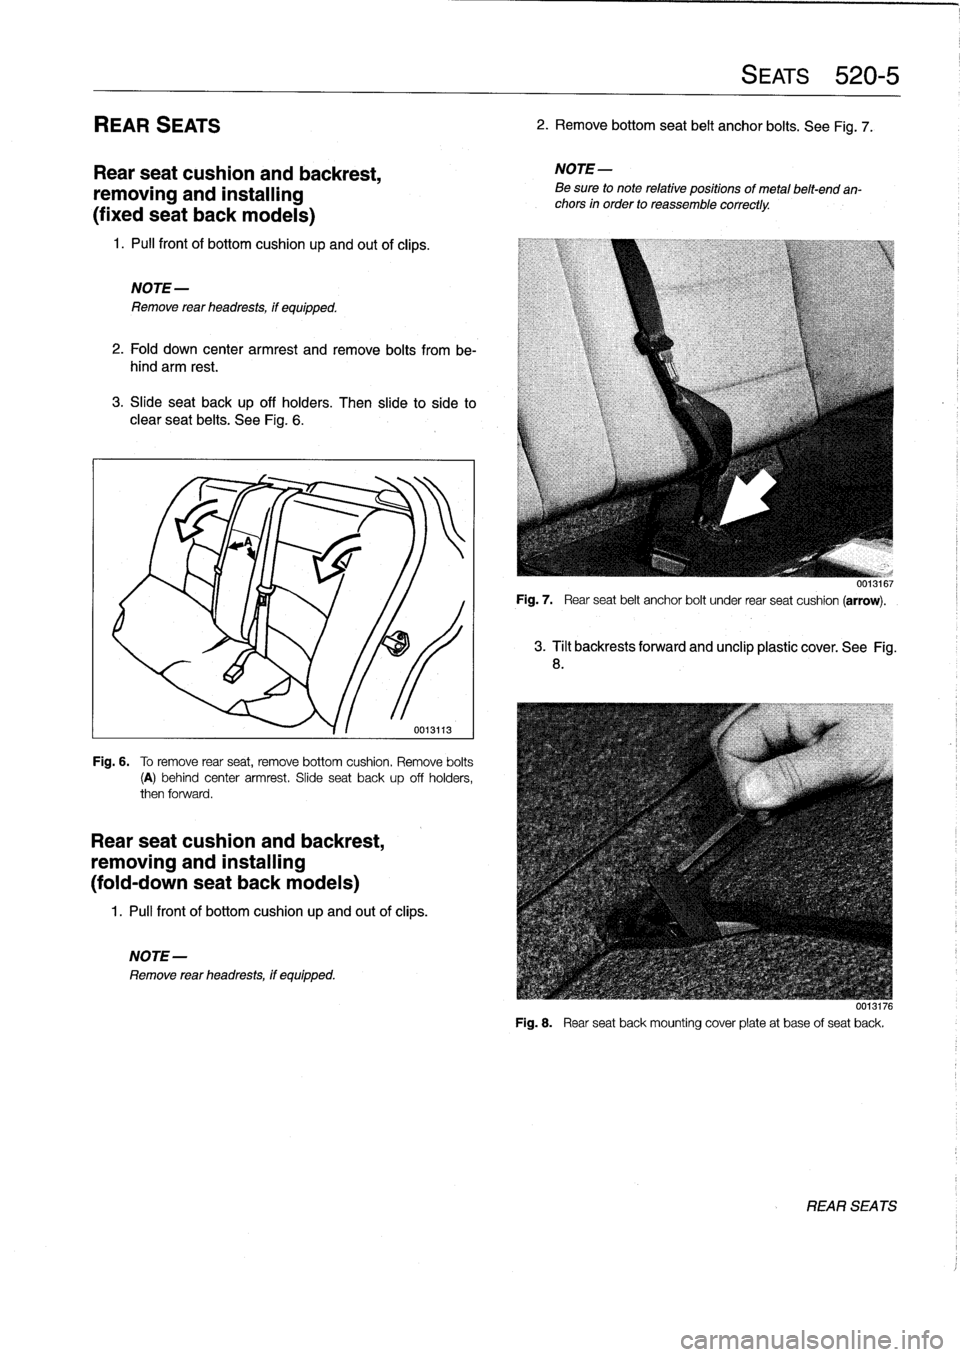 BMW 318i 1997 E36 Workshop Manual 
REAR
SEATS

Rear
seat
cushion
and
backrest,

removing
and
installing

(fixed
seat
back
modeis)

1
.
Pull
front
of
bottomcushion
up
and
out
of
clips
.

NOTE-

Remove
rear
headrests,
if
equipped
.

2
.